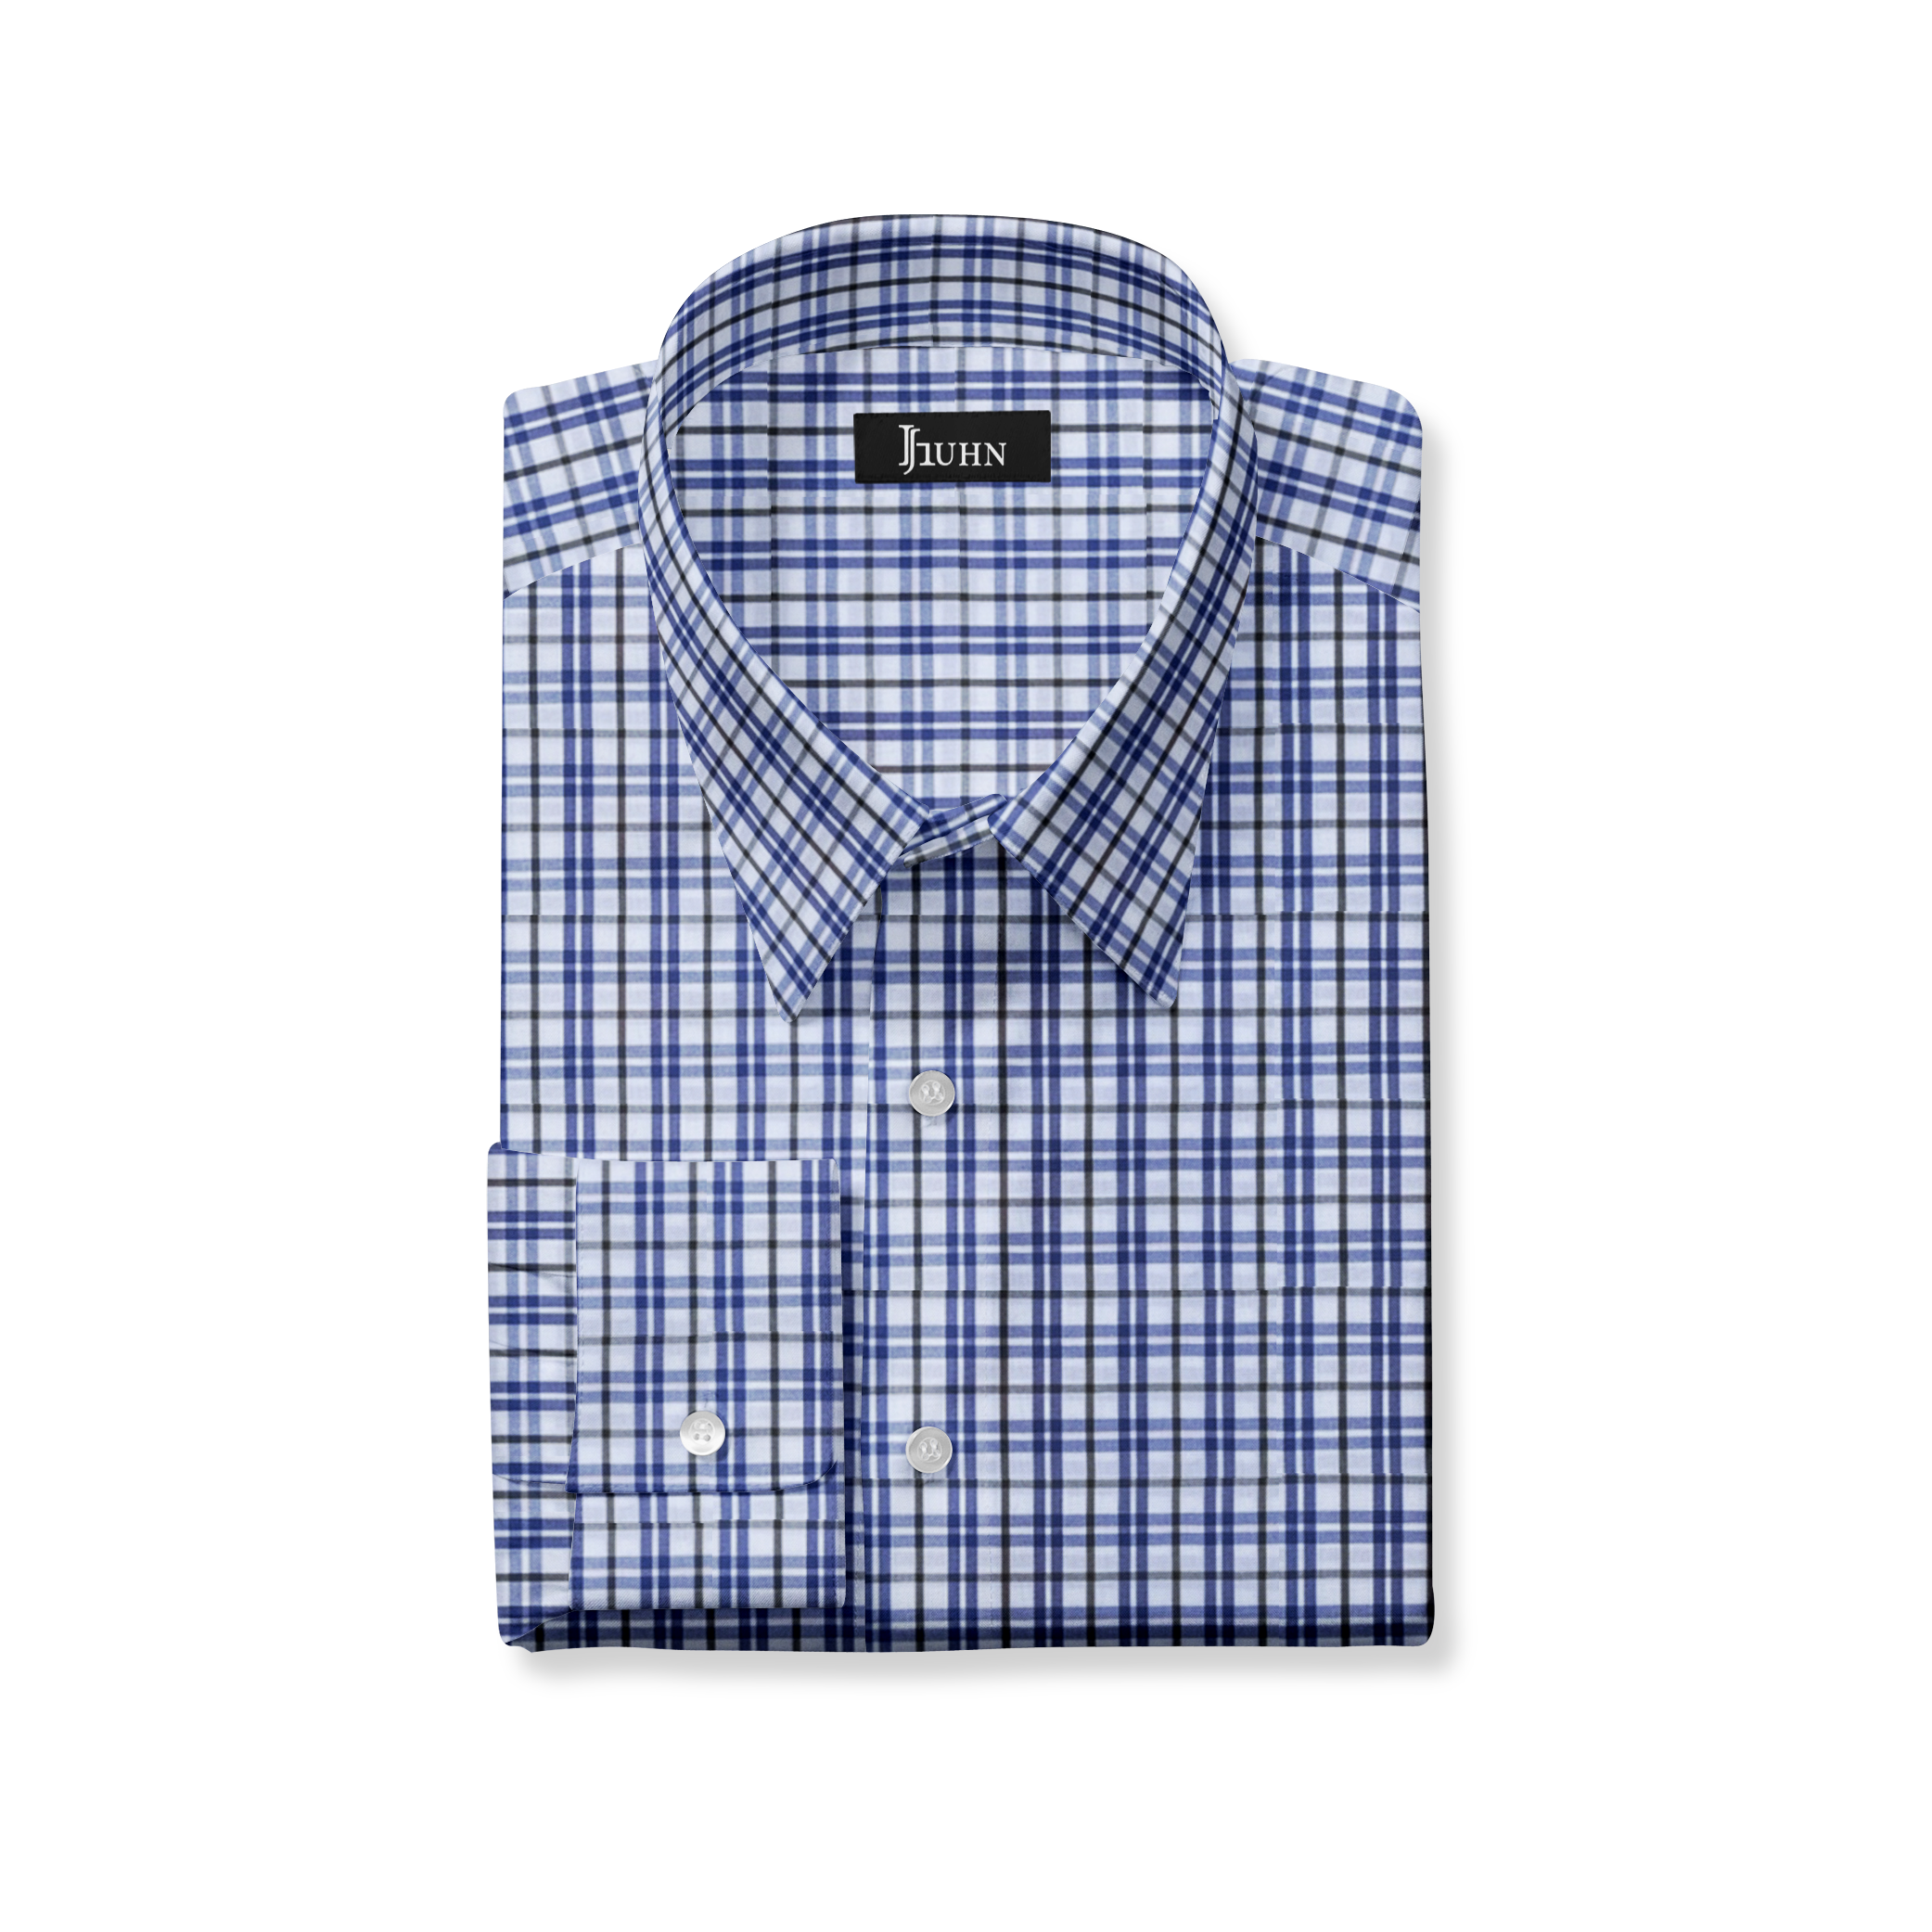 NEW Plaids Men’s Shirt in Black and Blue